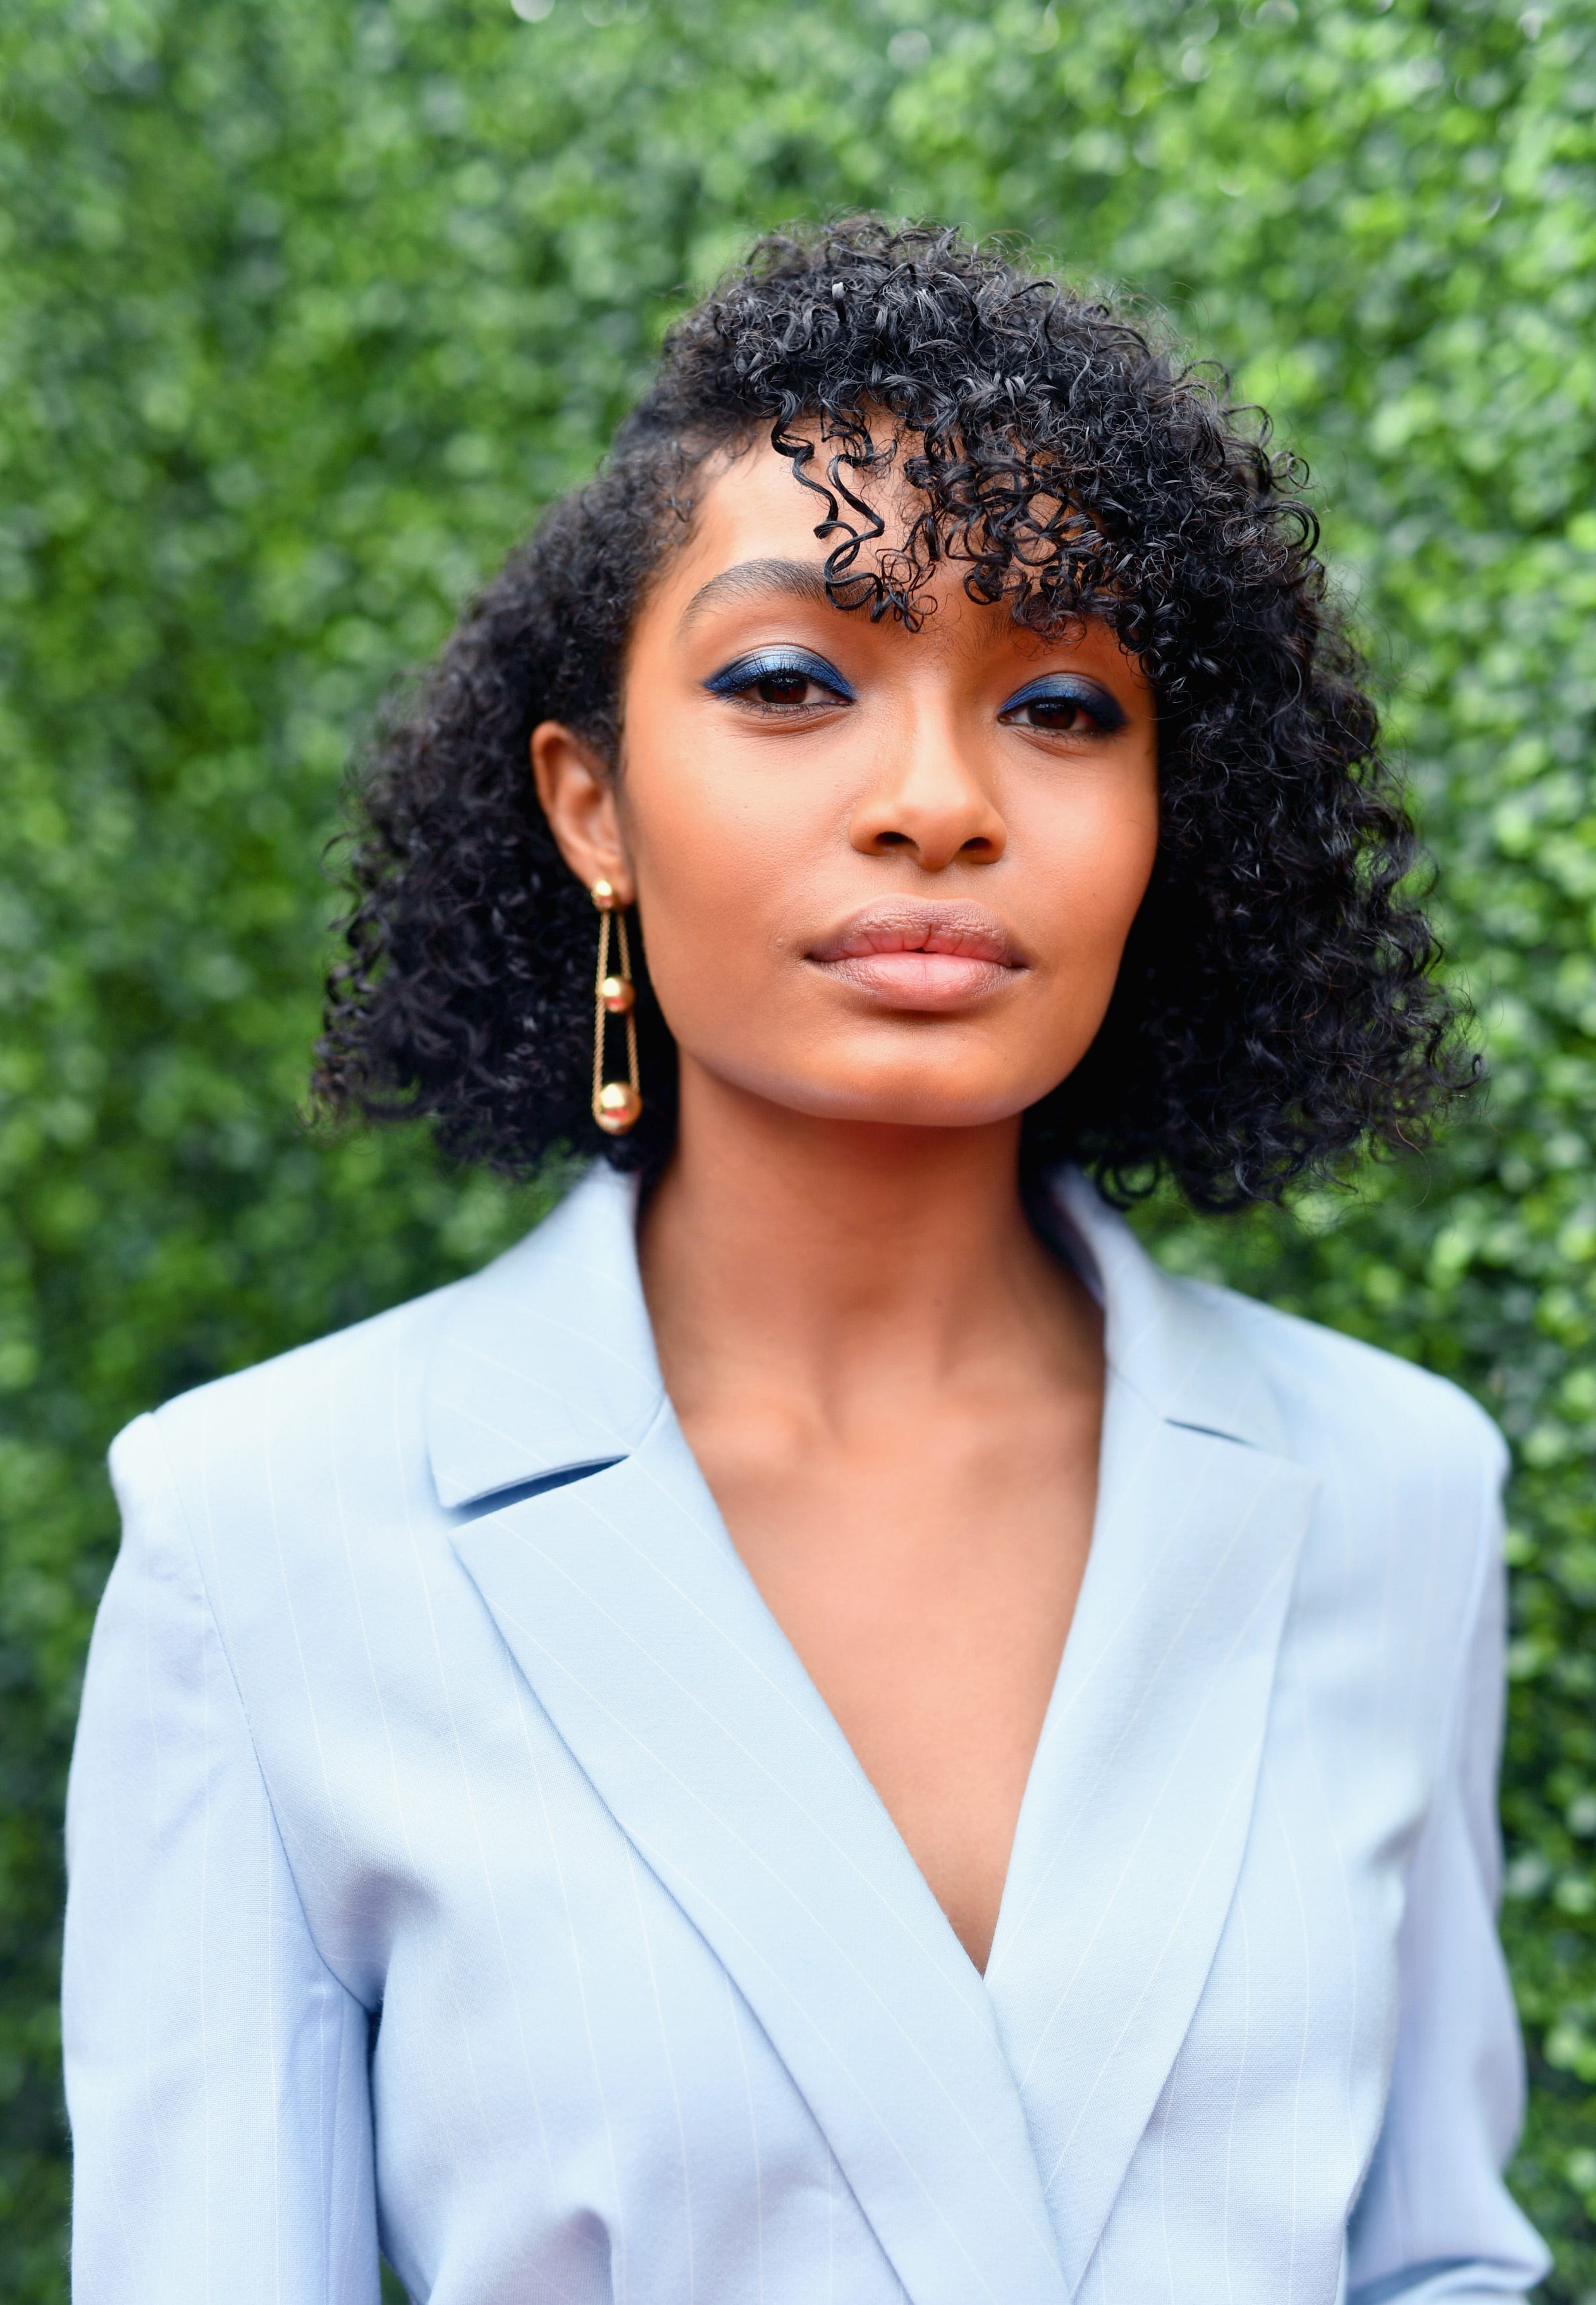 25 Curly Pixie Hairstyles to Inspire Your Next Cut